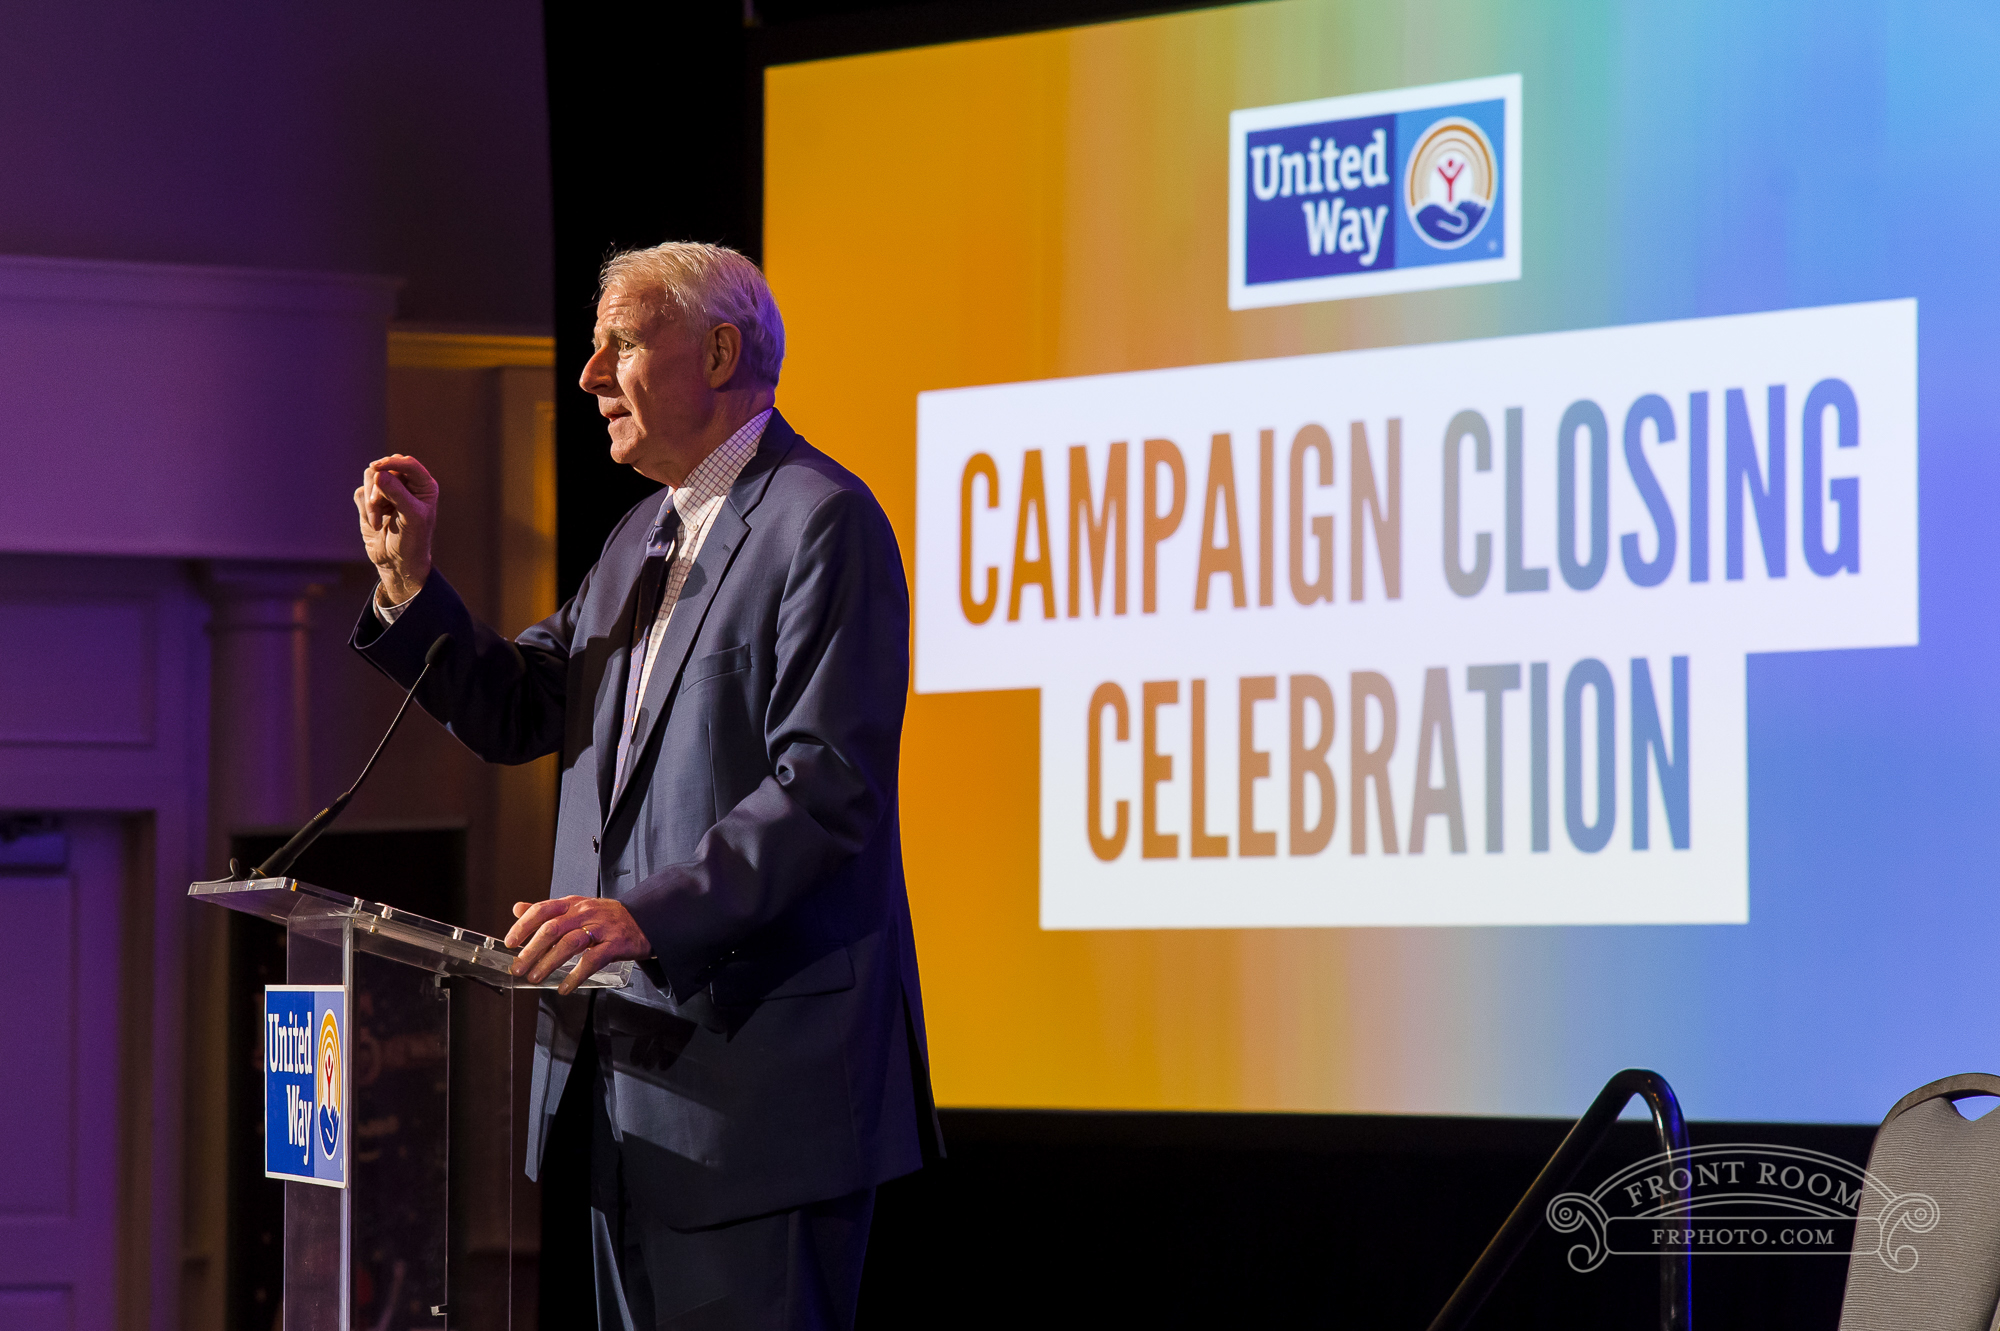 Event Photography: United Way Campaign Closing Celebration 2018